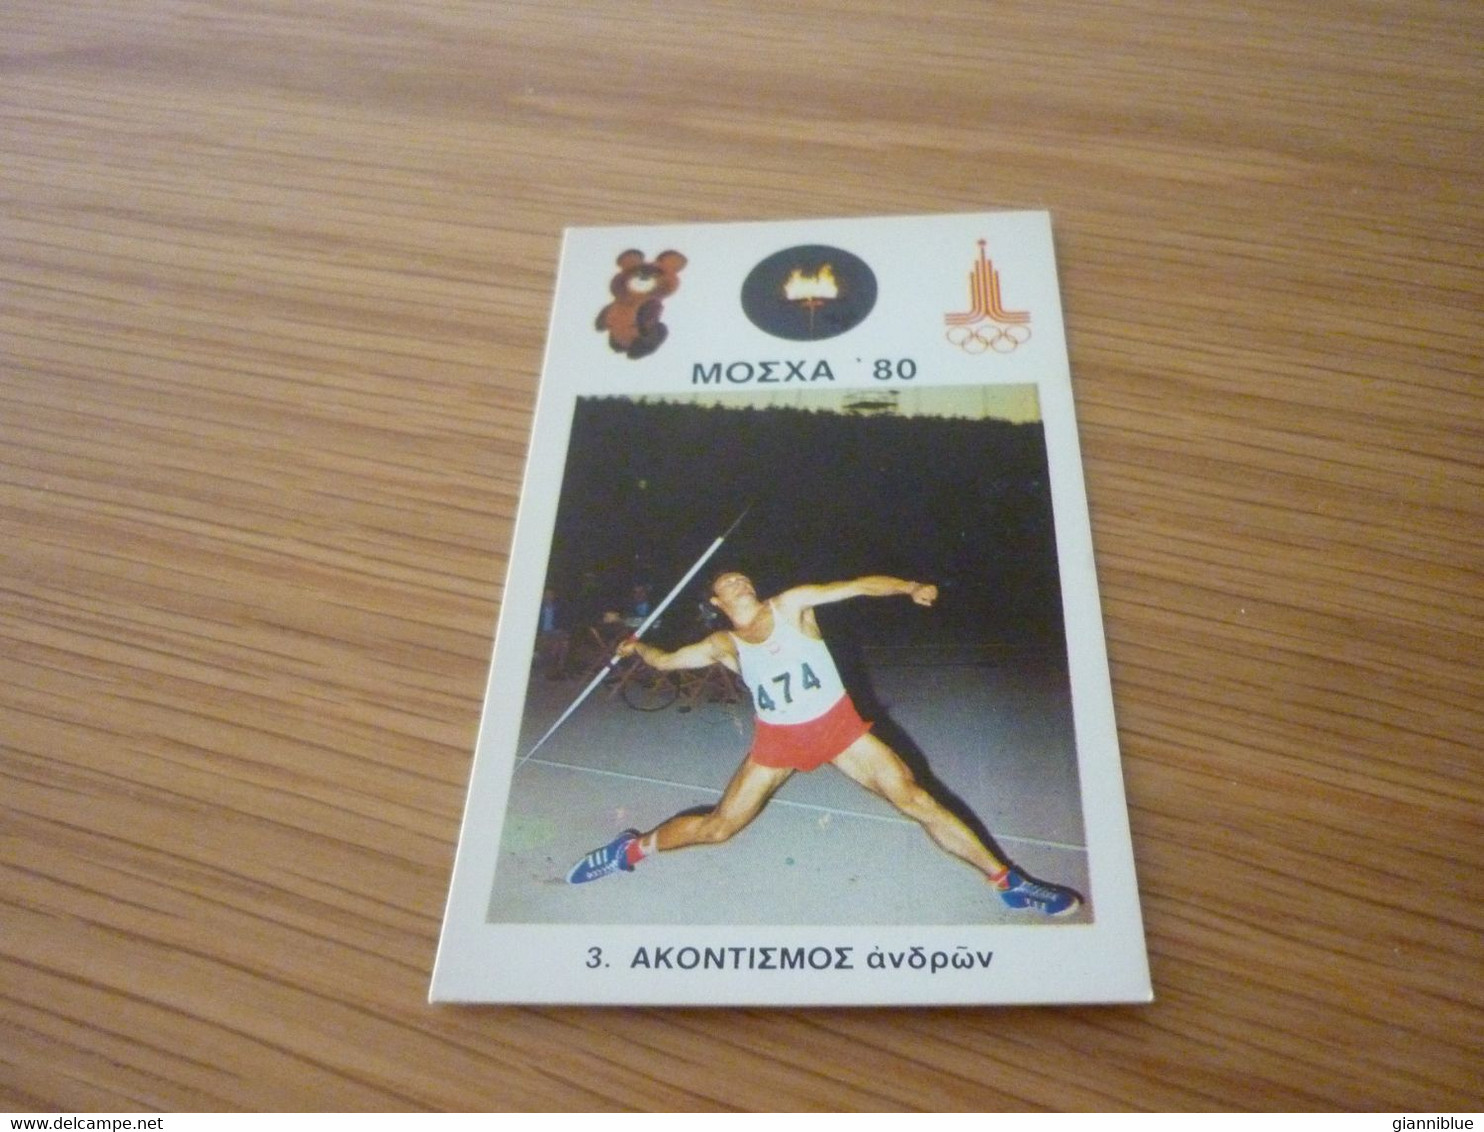 Men's Javelin Throw Moscow 1980 Olympic Games Old Greek Trading Card - Trading-Karten